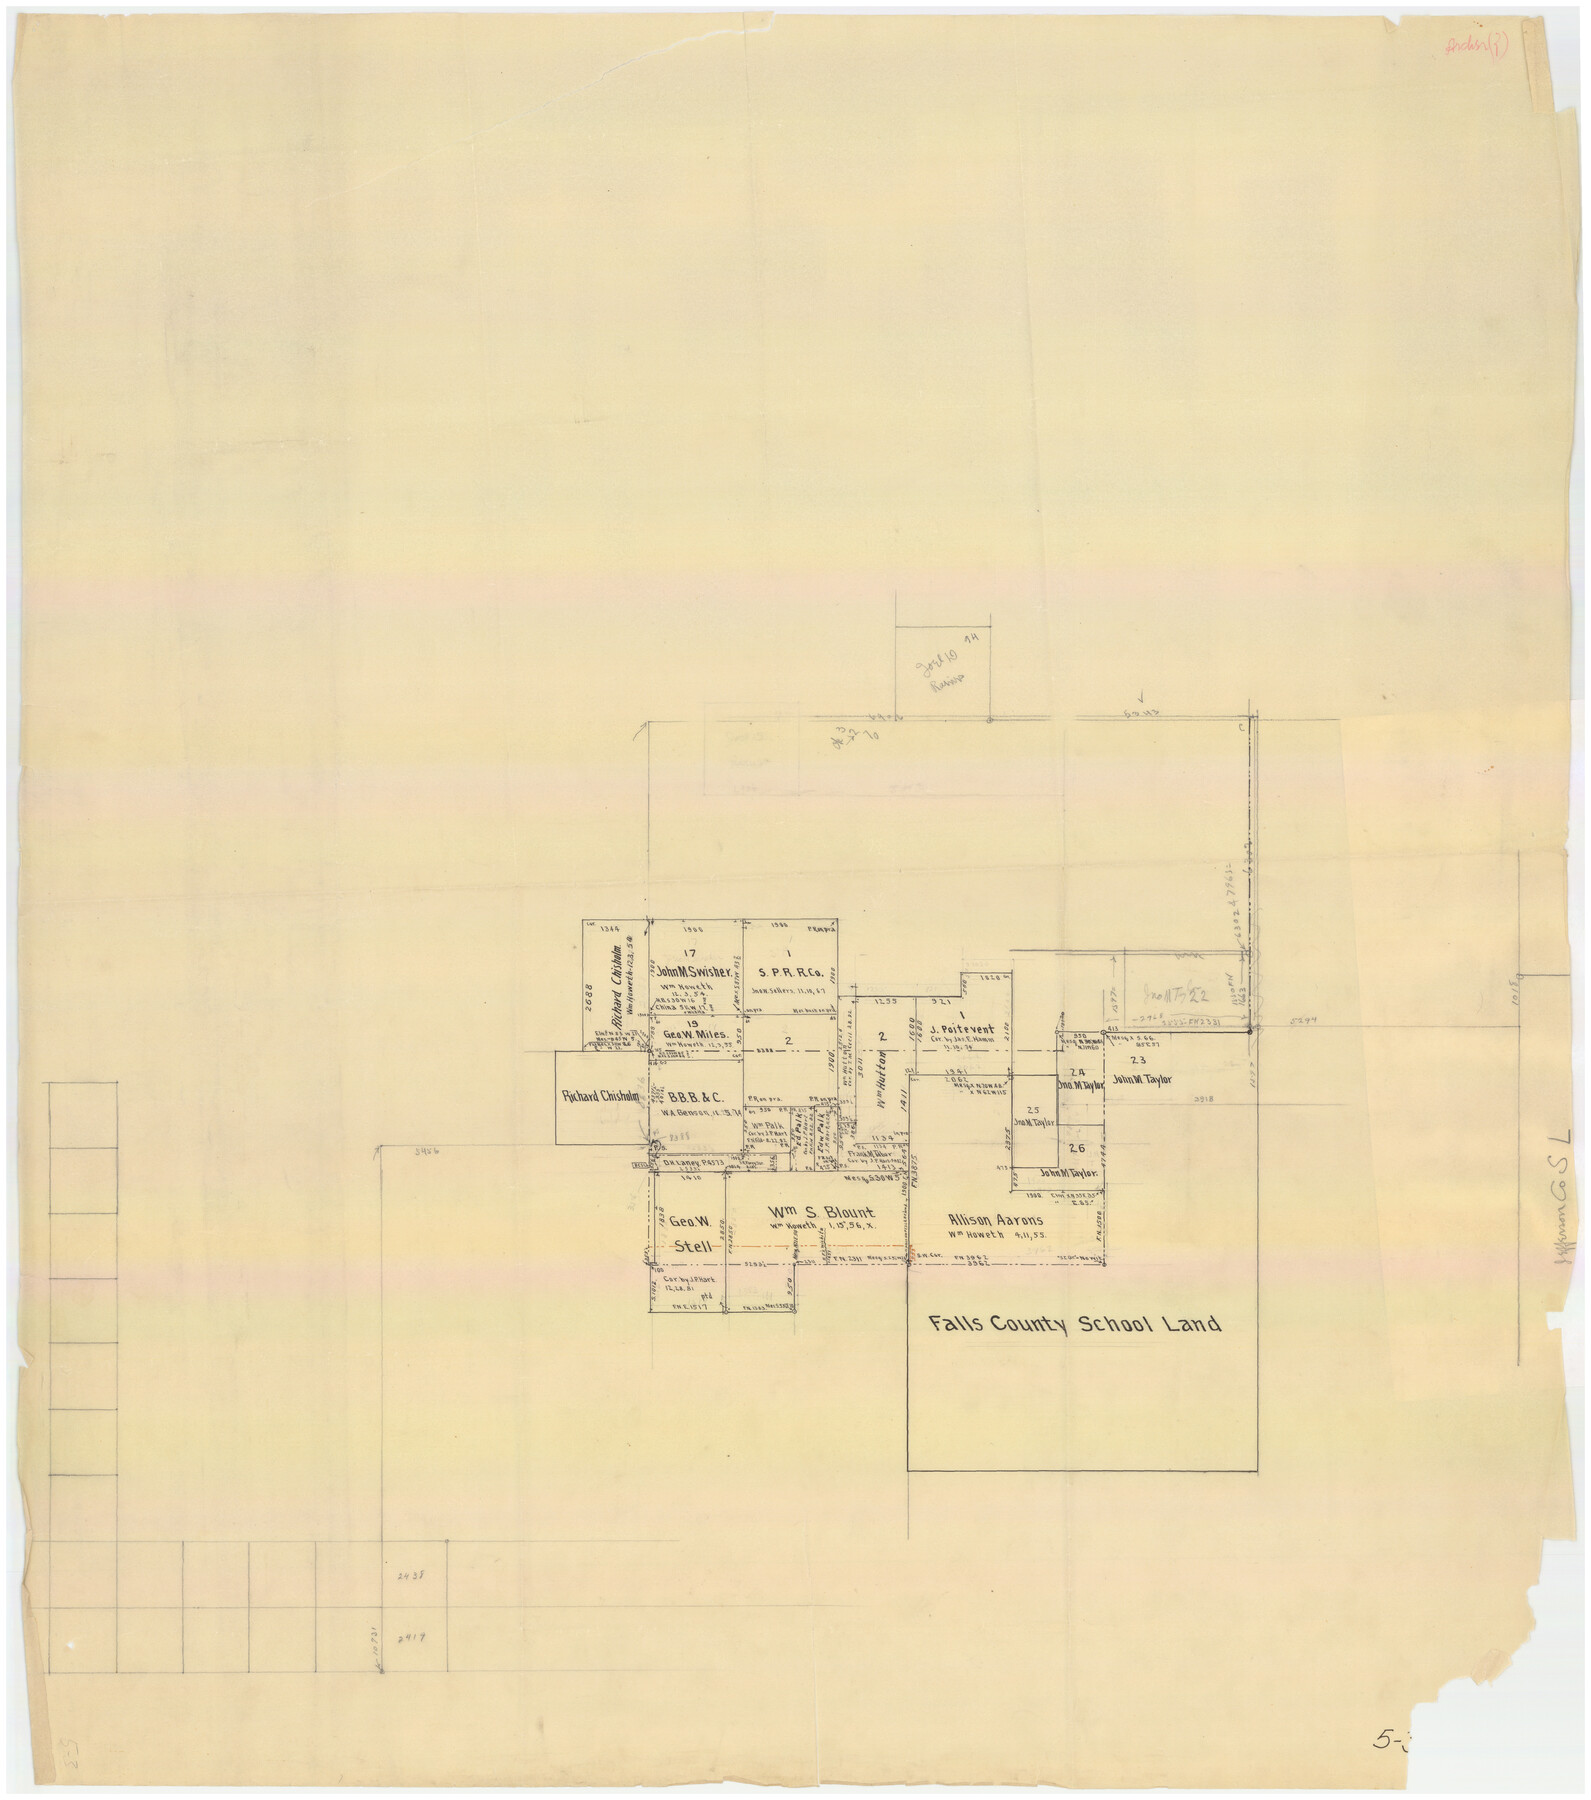 90168, [Surveys in the vicinity of Falls County School Land], Twichell Survey Records